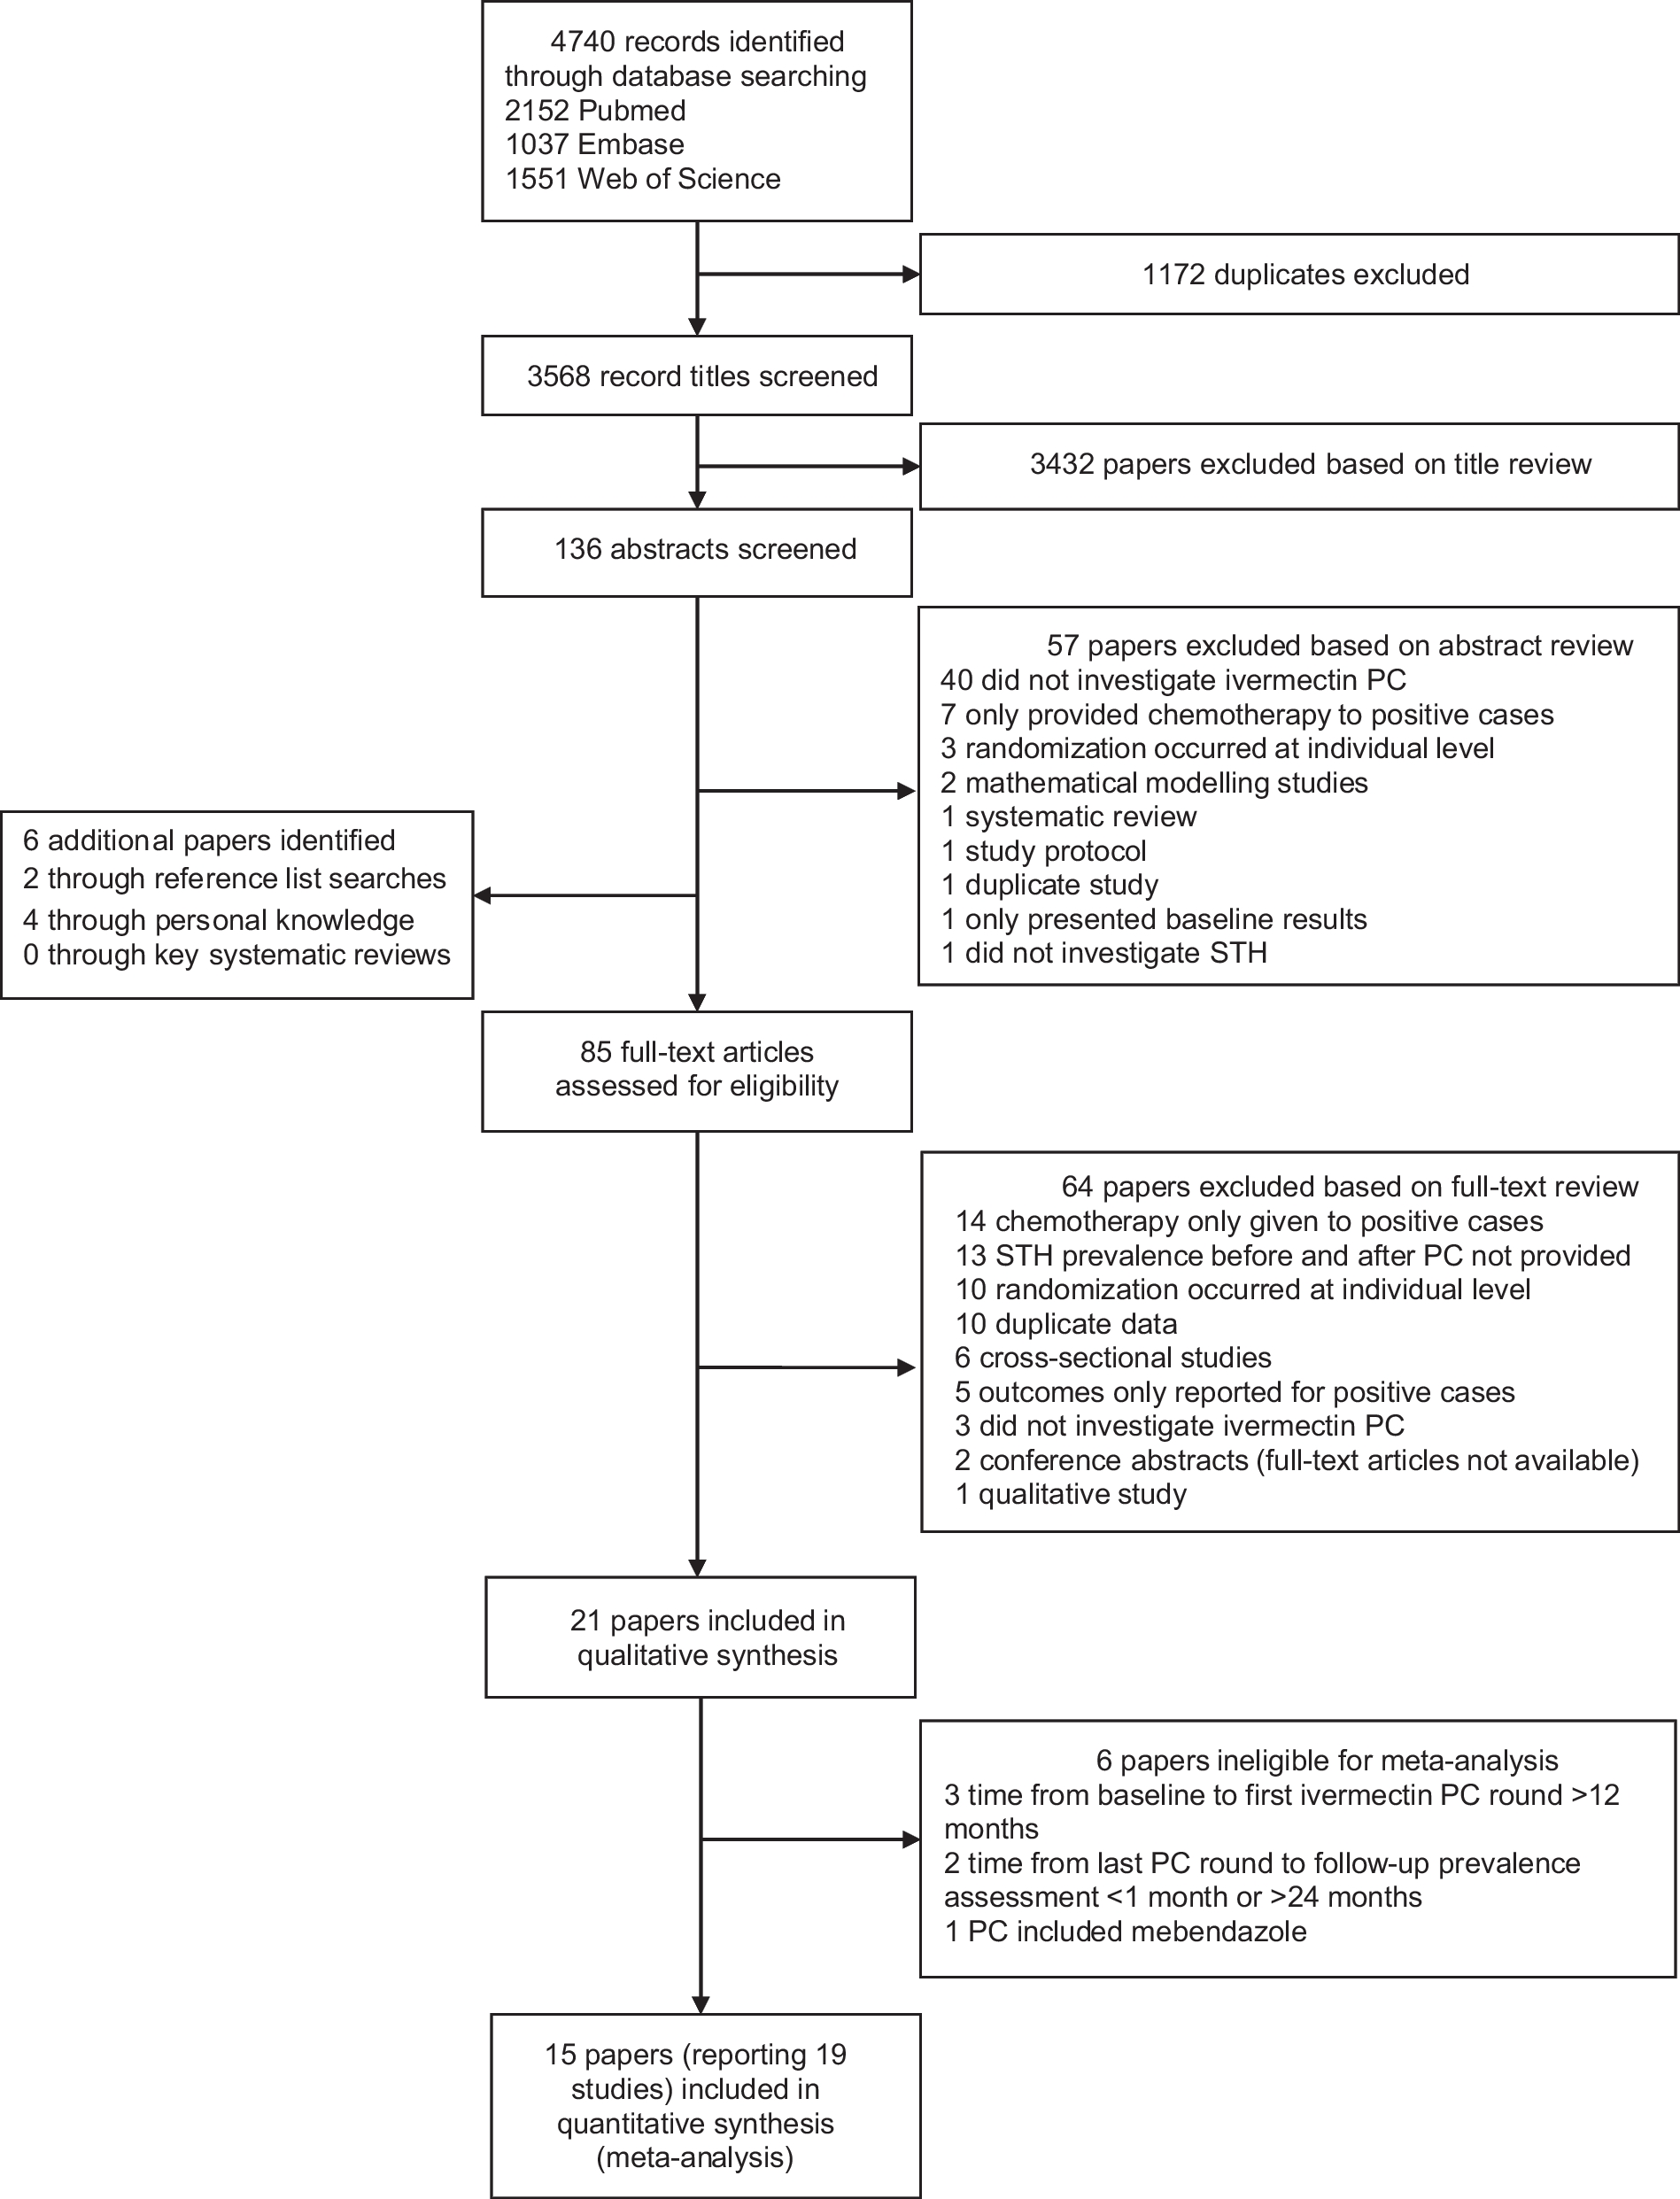 Effectiveness of ivermectin mass drug administration in the control of soil-transmitted helminth infections in endemic populations: a systematic review and meta-analysis